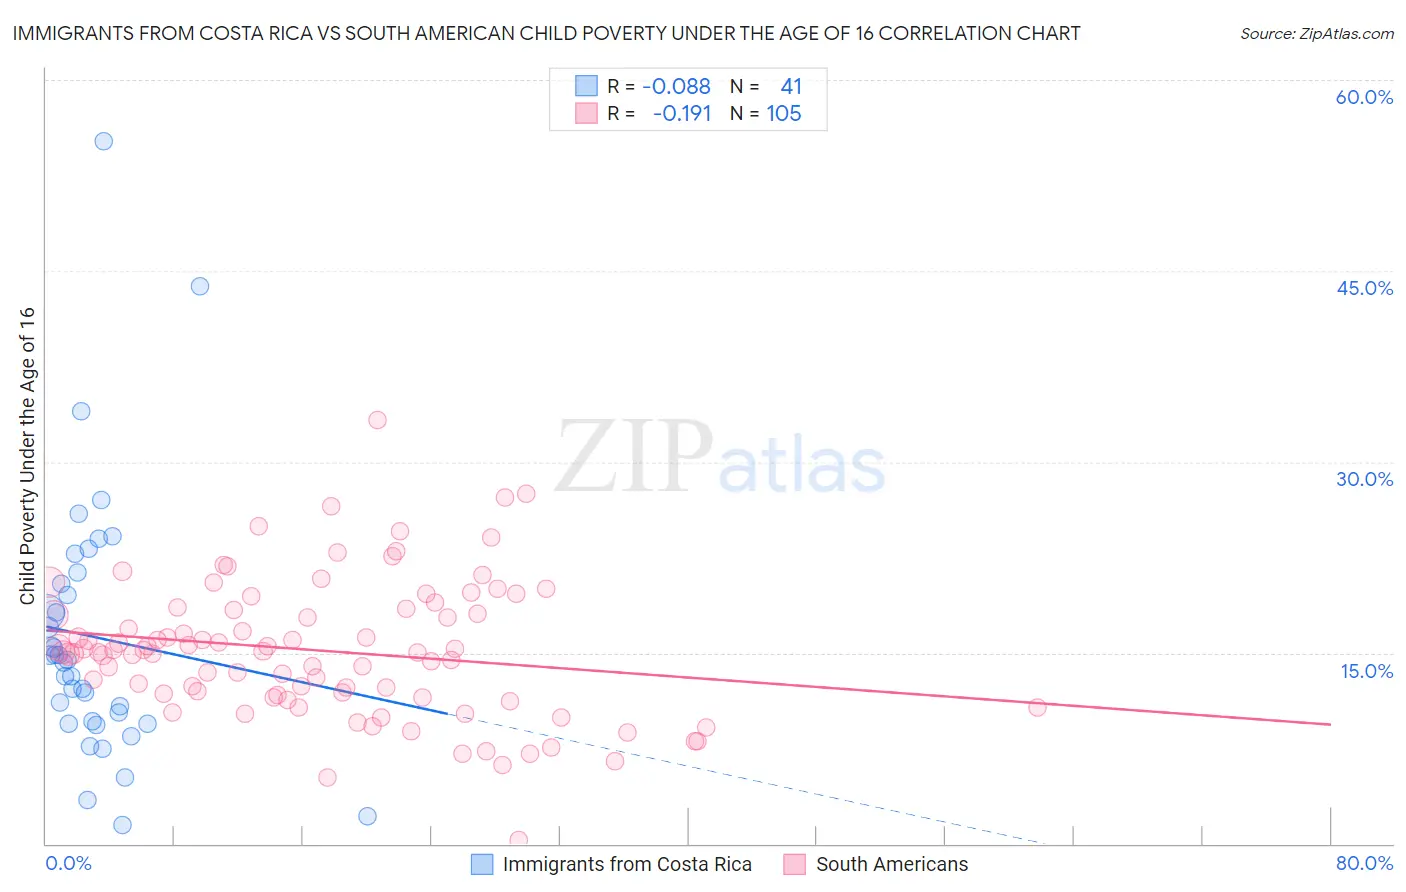 Immigrants from Costa Rica vs South American Child Poverty Under the Age of 16